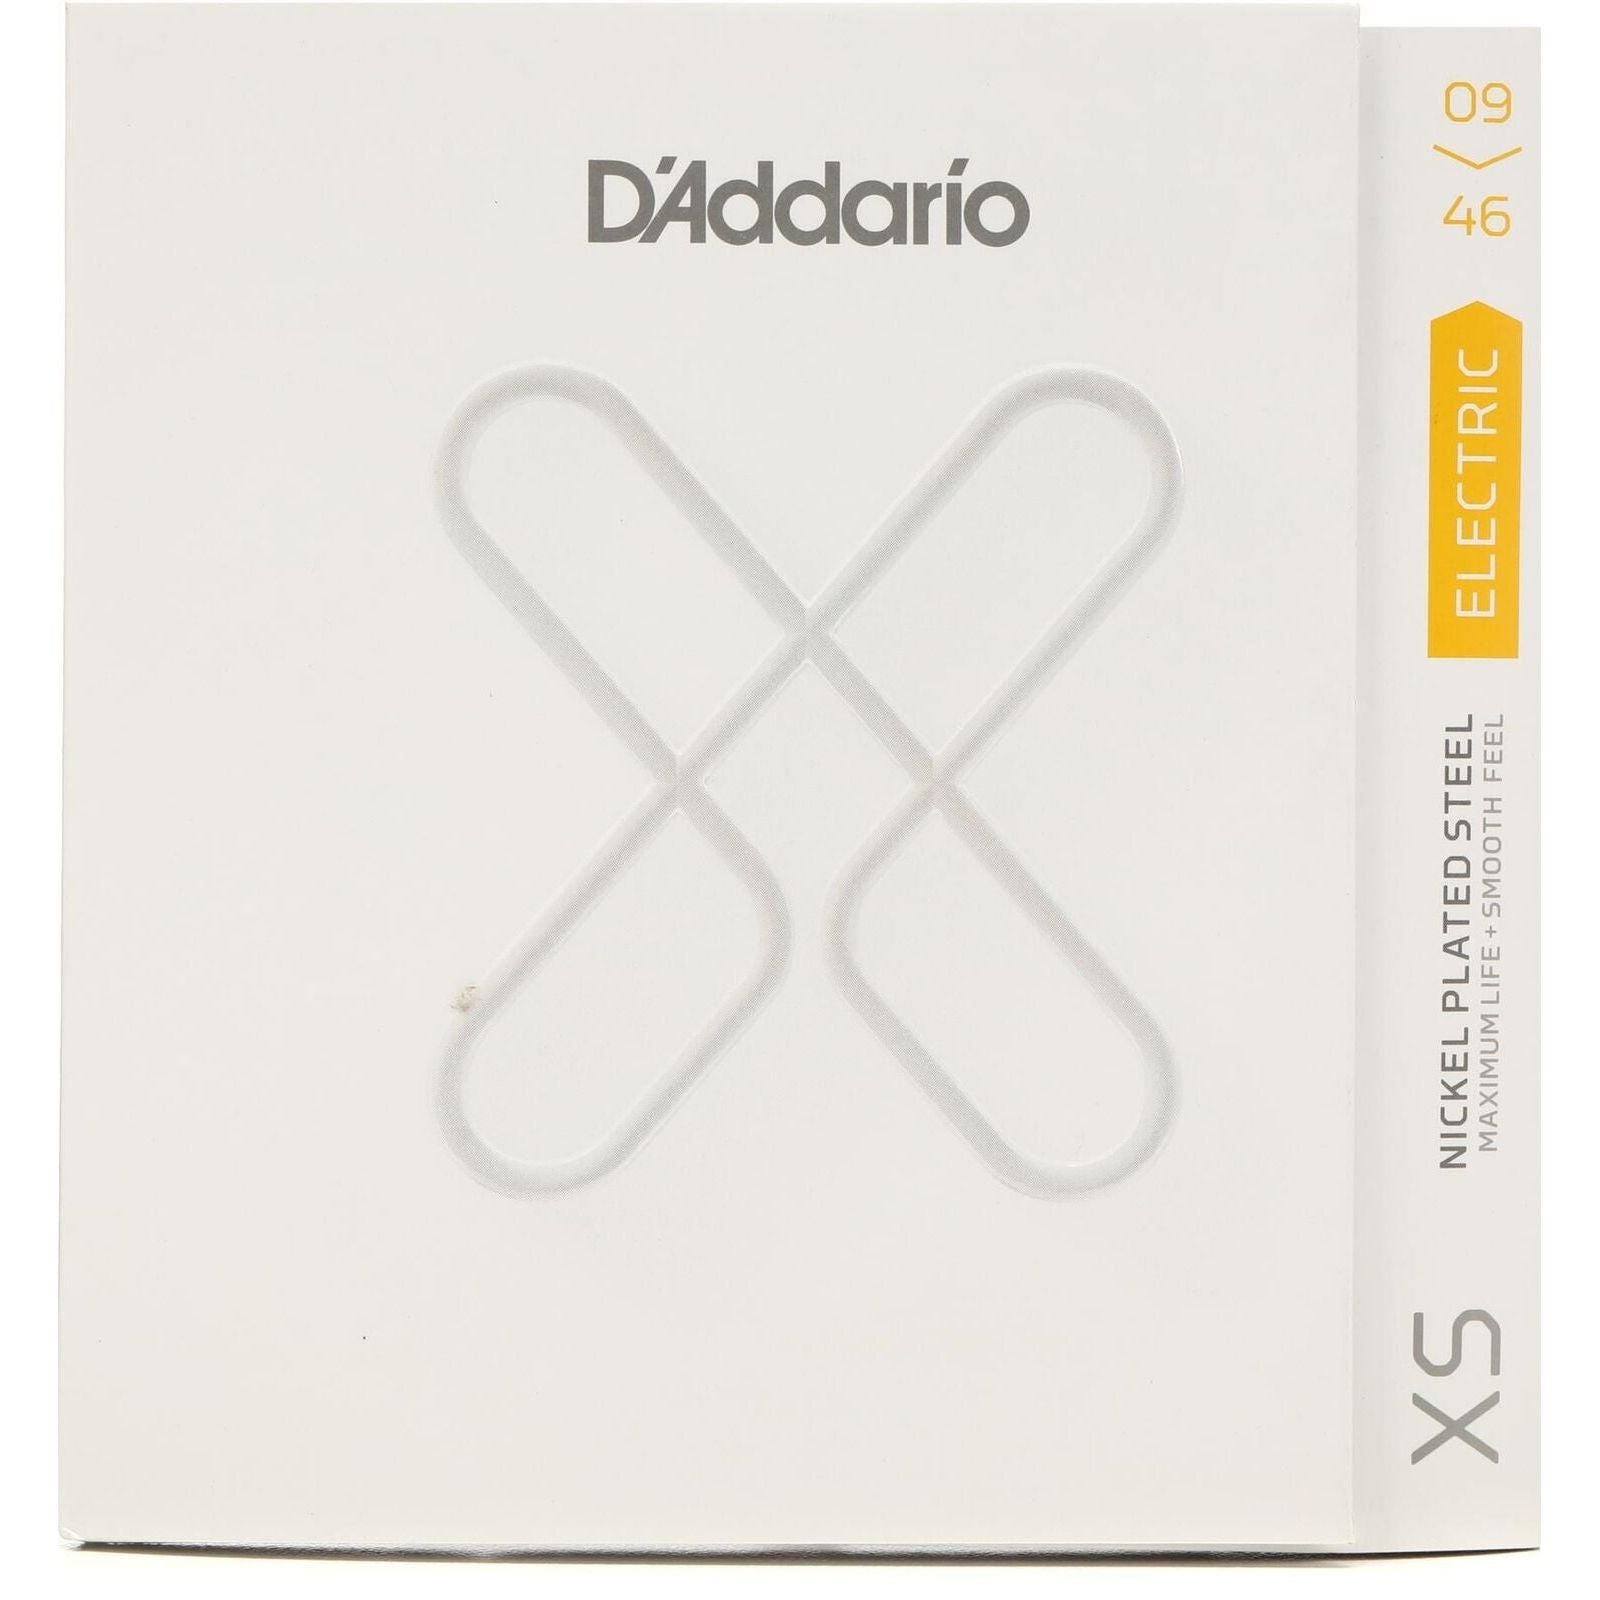 D'Addario 9-46 XS Coated Electric Strings